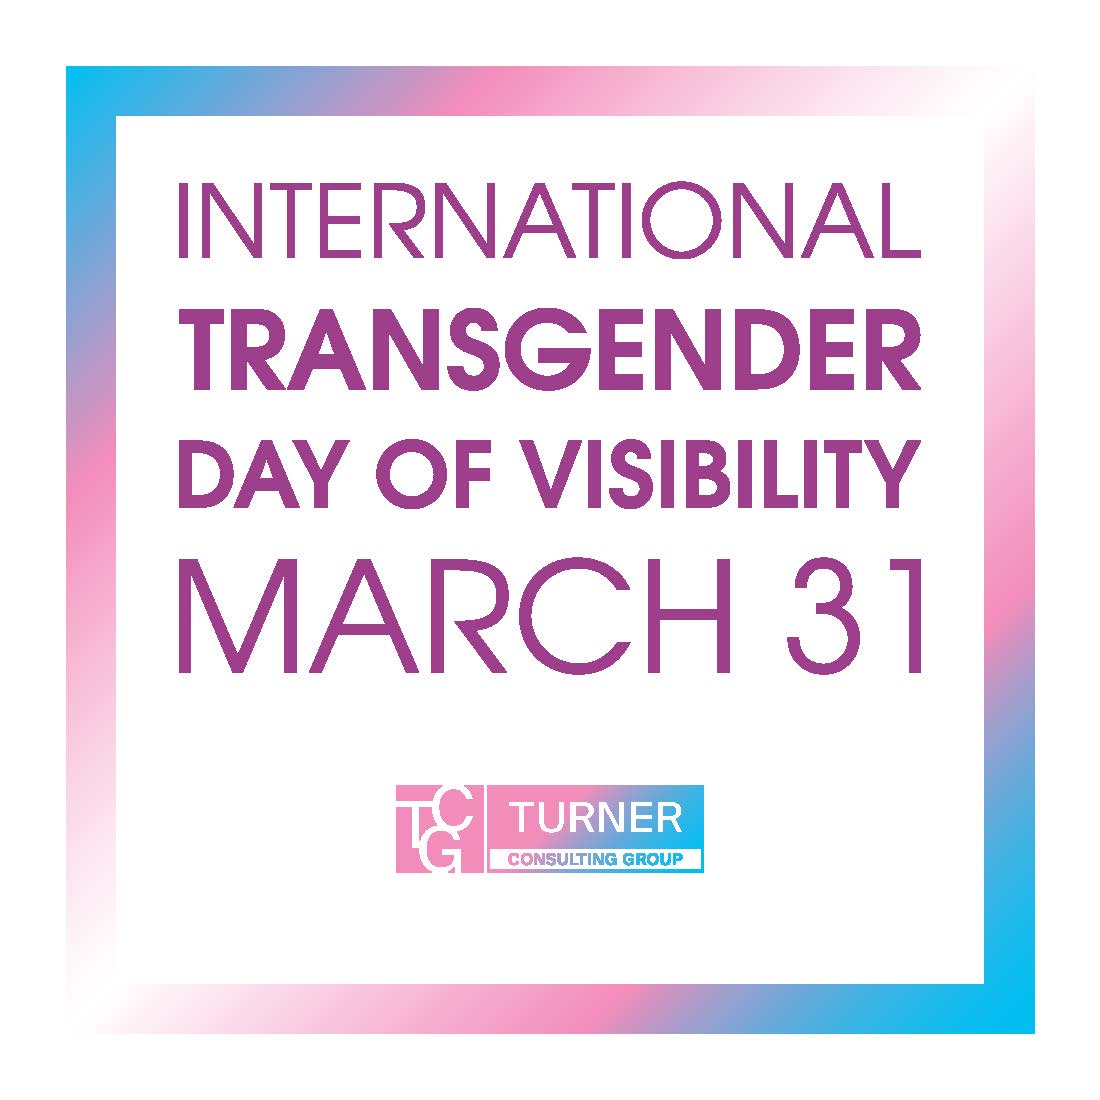 Today we celebrate trans joy and visibility. We also recognize that trans people are under attack around the world and stand with trans people, because trans rights are human rights. #TDOV #transgenderawareness #allyship